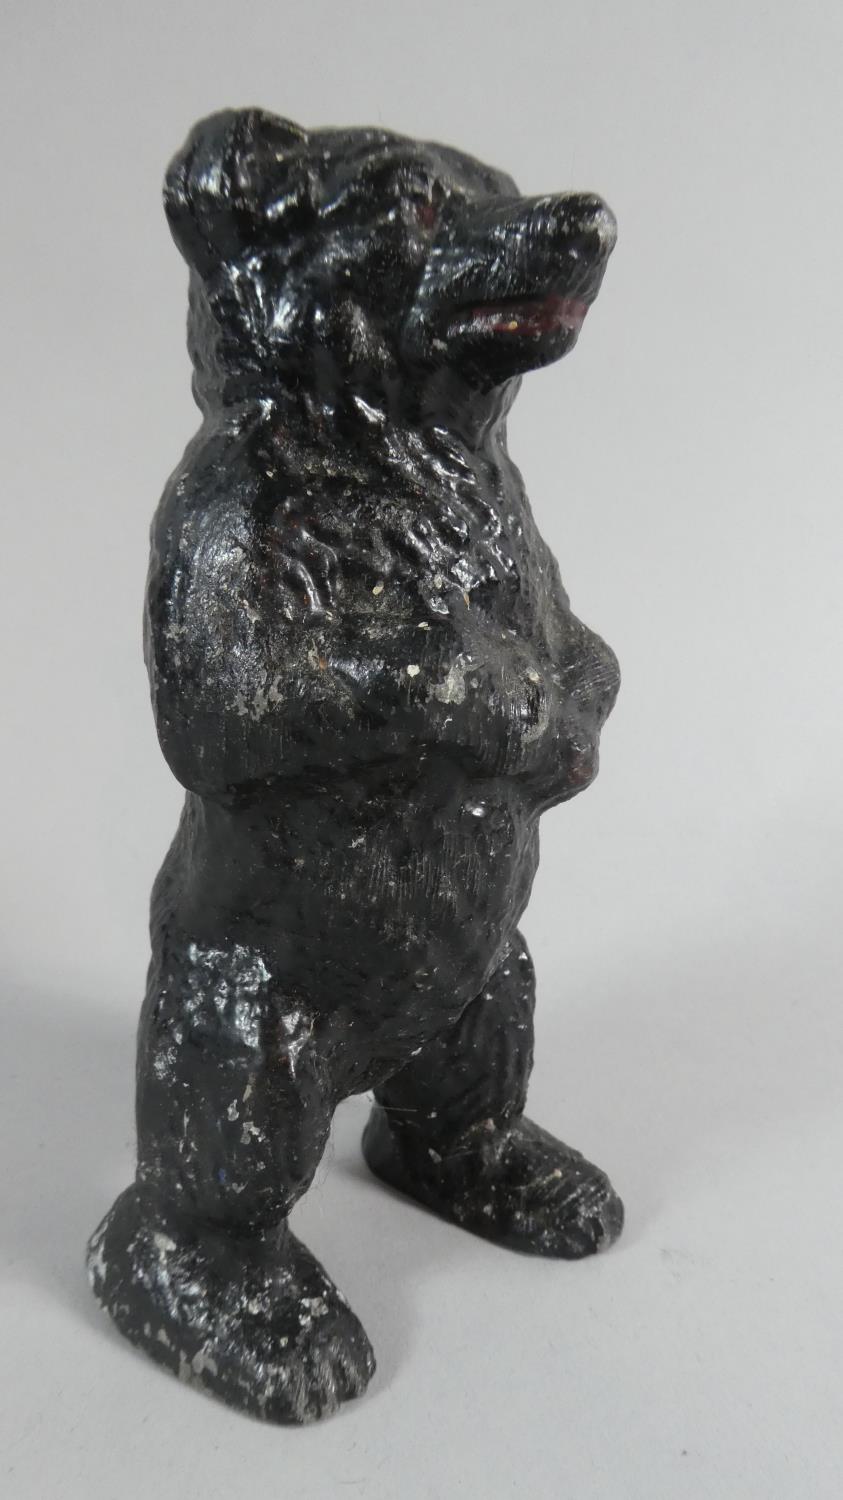 A Black Painted Reproduction Spelter Copy of a Cast Iron Standing Bear Money Box, 15cm High - Image 2 of 3